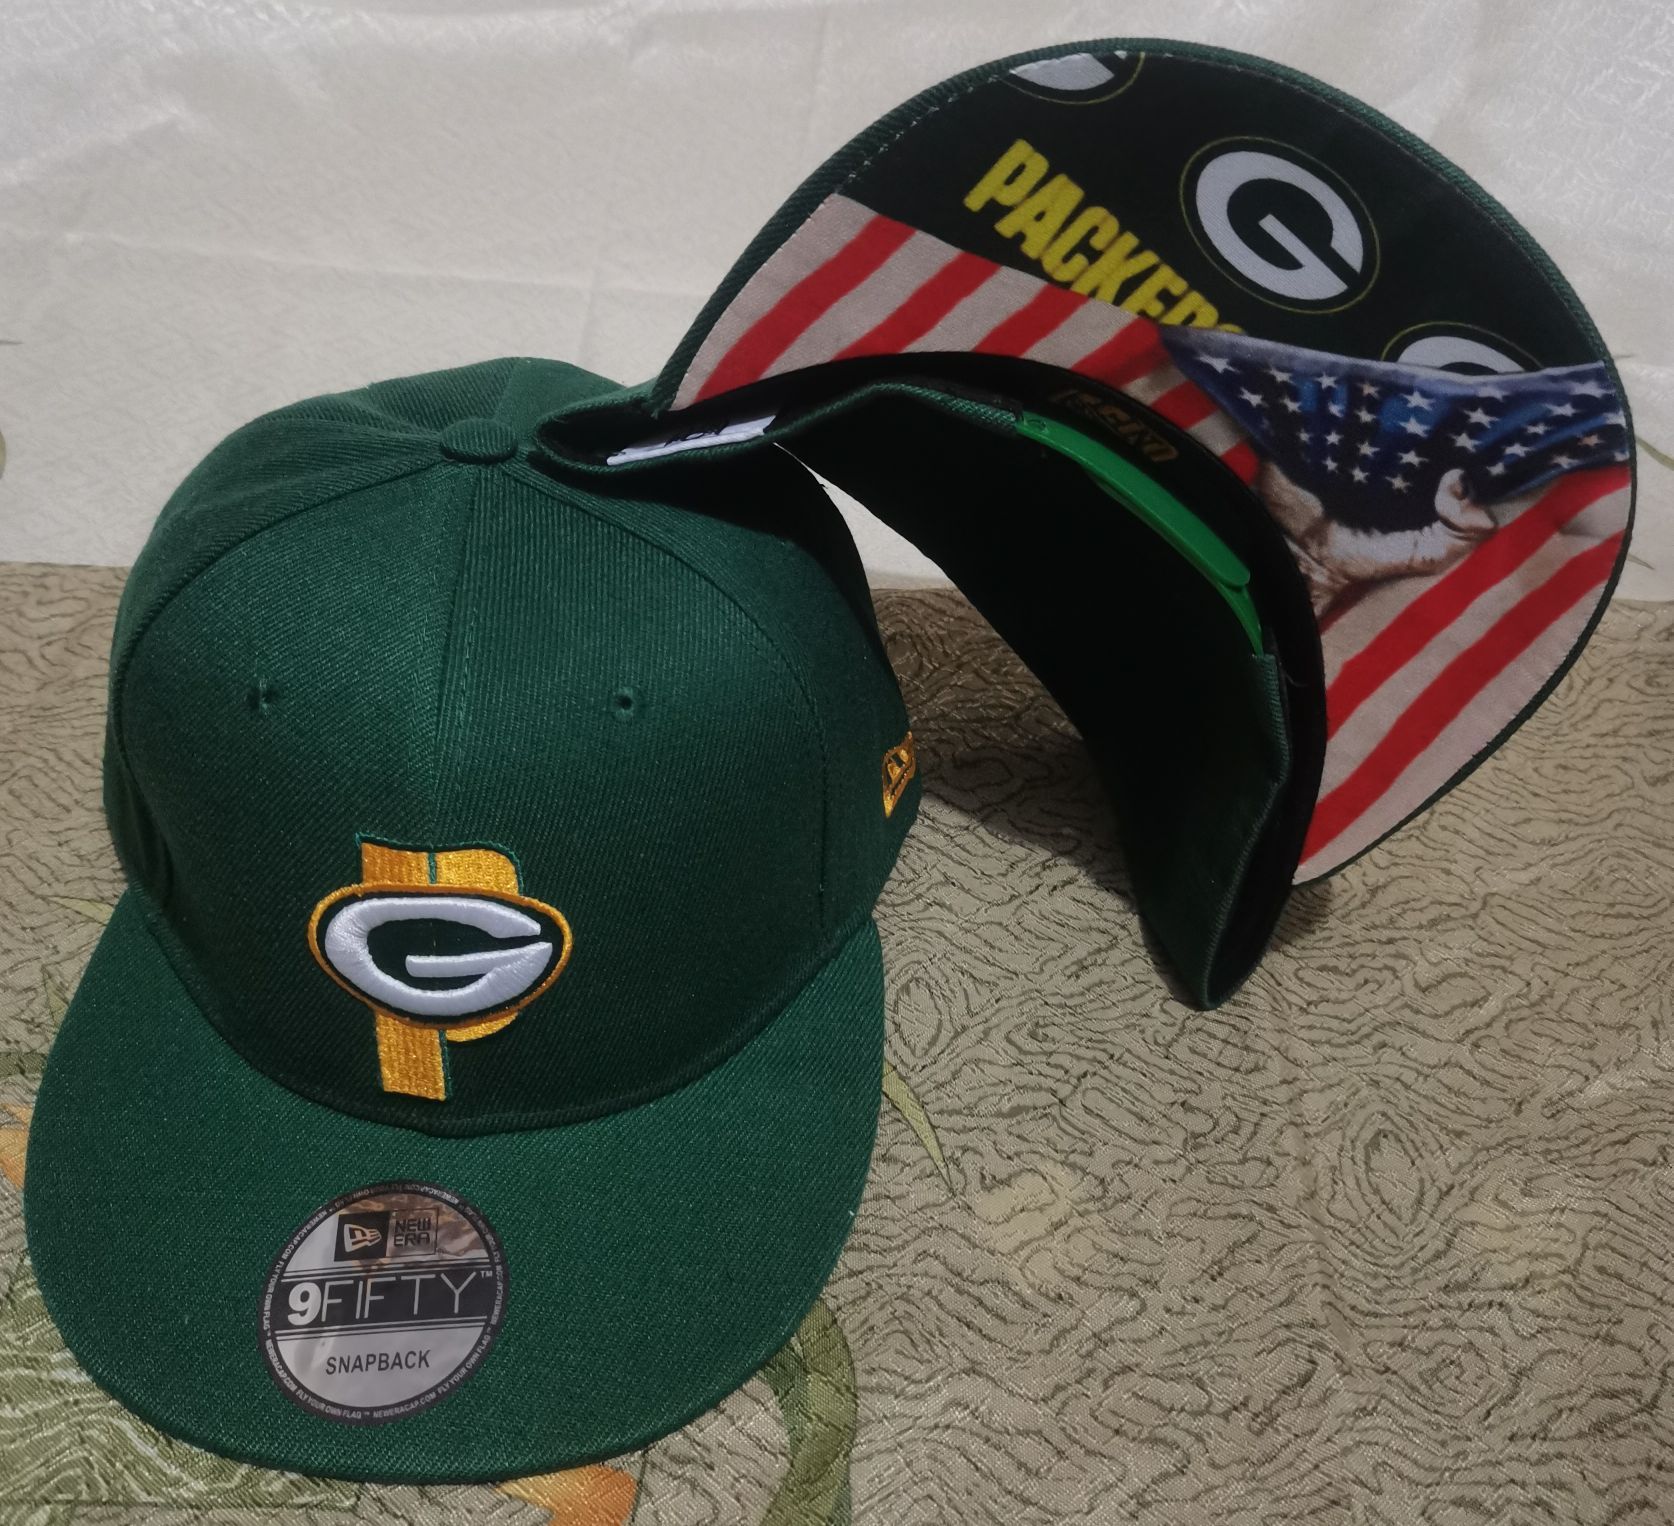 2021 NFL Green Bay Packers #9 hat->nfl hats->Sports Caps